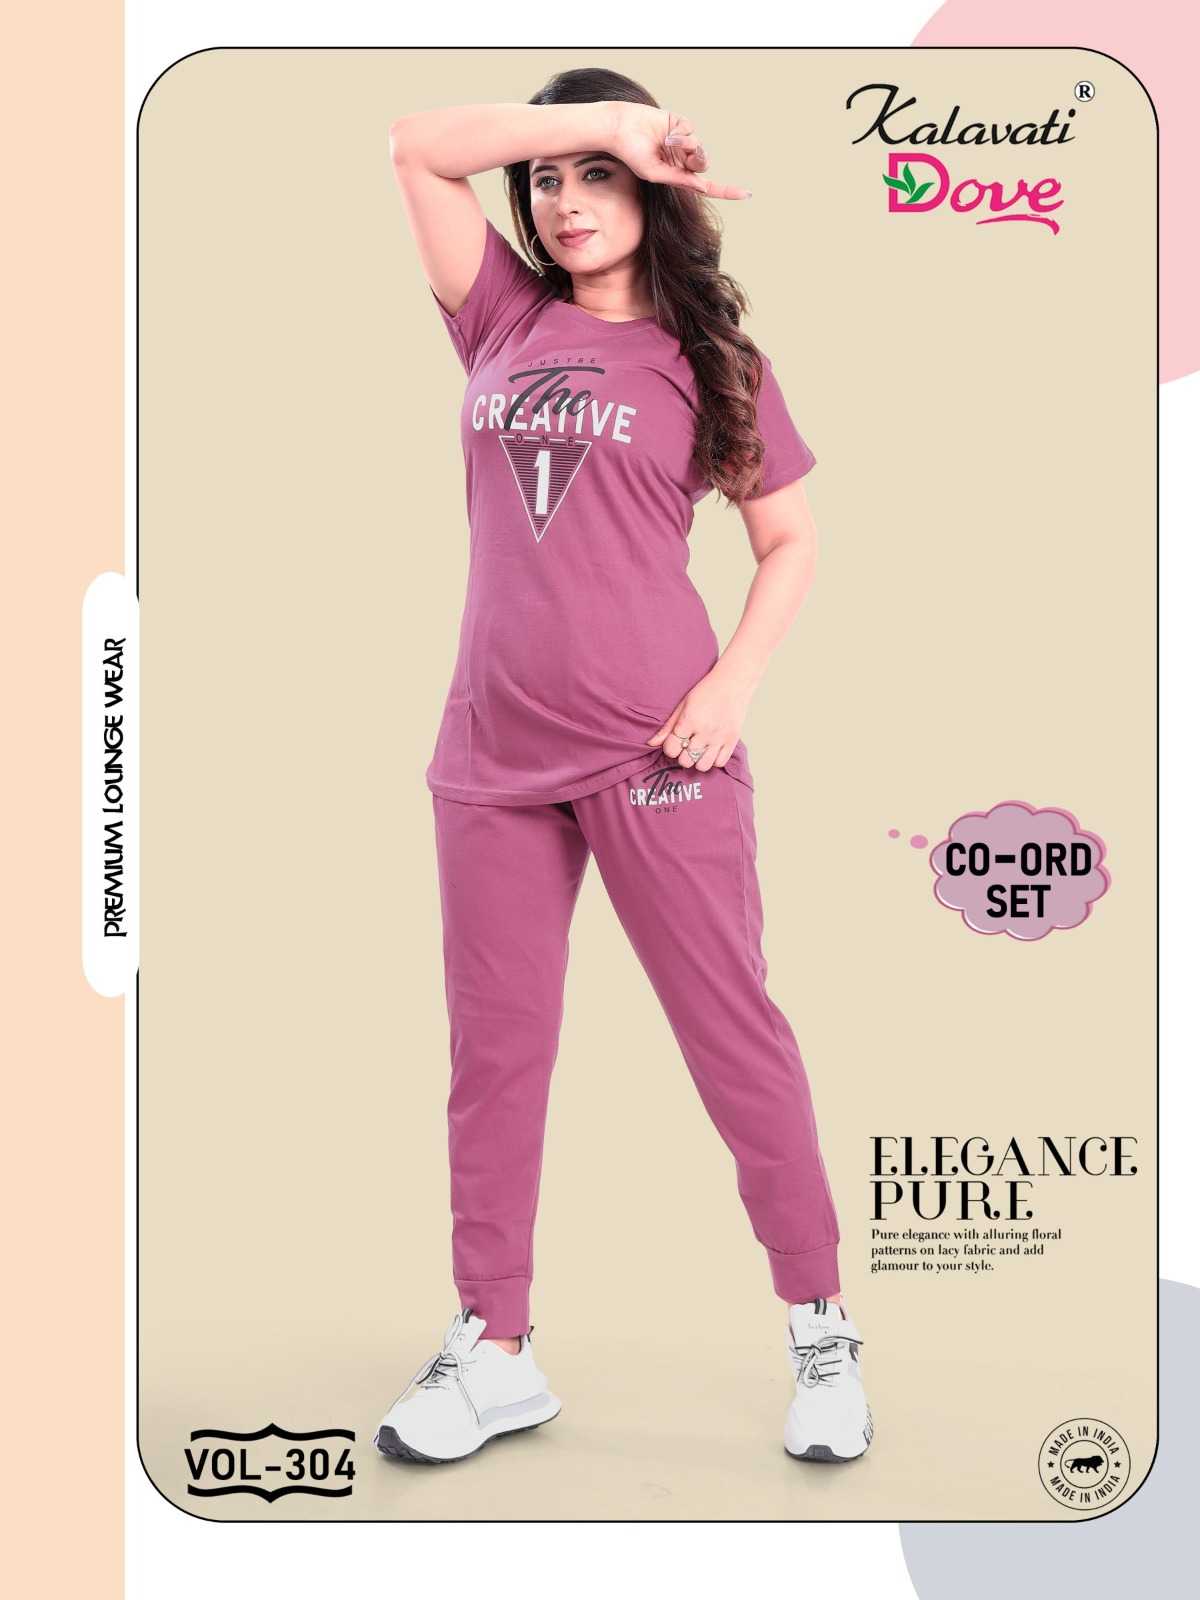 kalavati dove vol 304 cotton hosiery simple wear full stitch co-ord sets collection